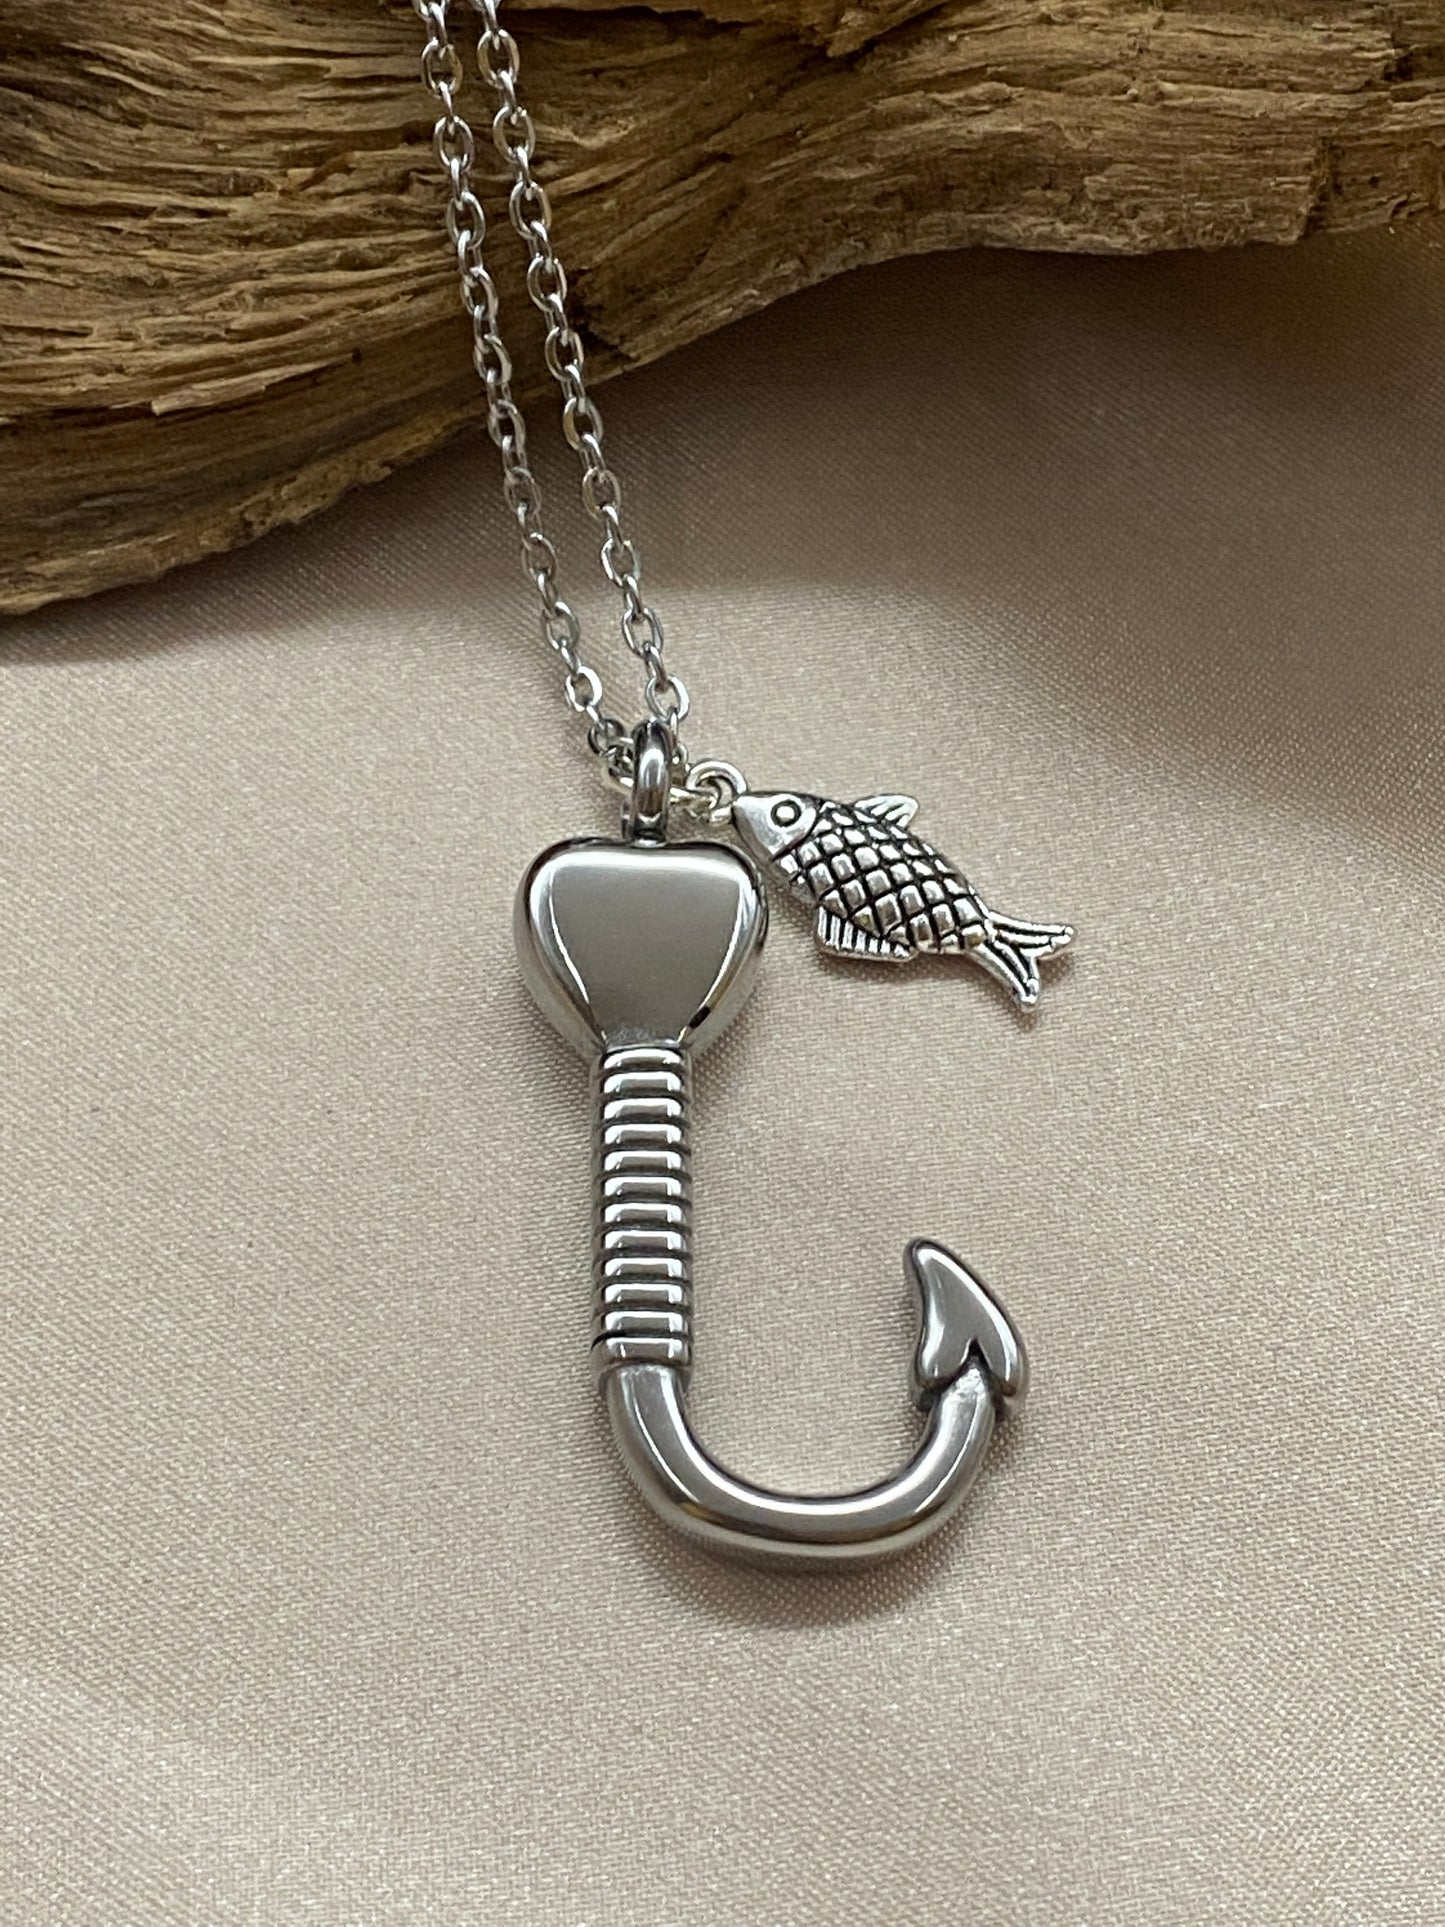 Fish Hook Urn Necklace with Silver Fish Charm - Cremation Pendant, Fishing Men's Jewelry